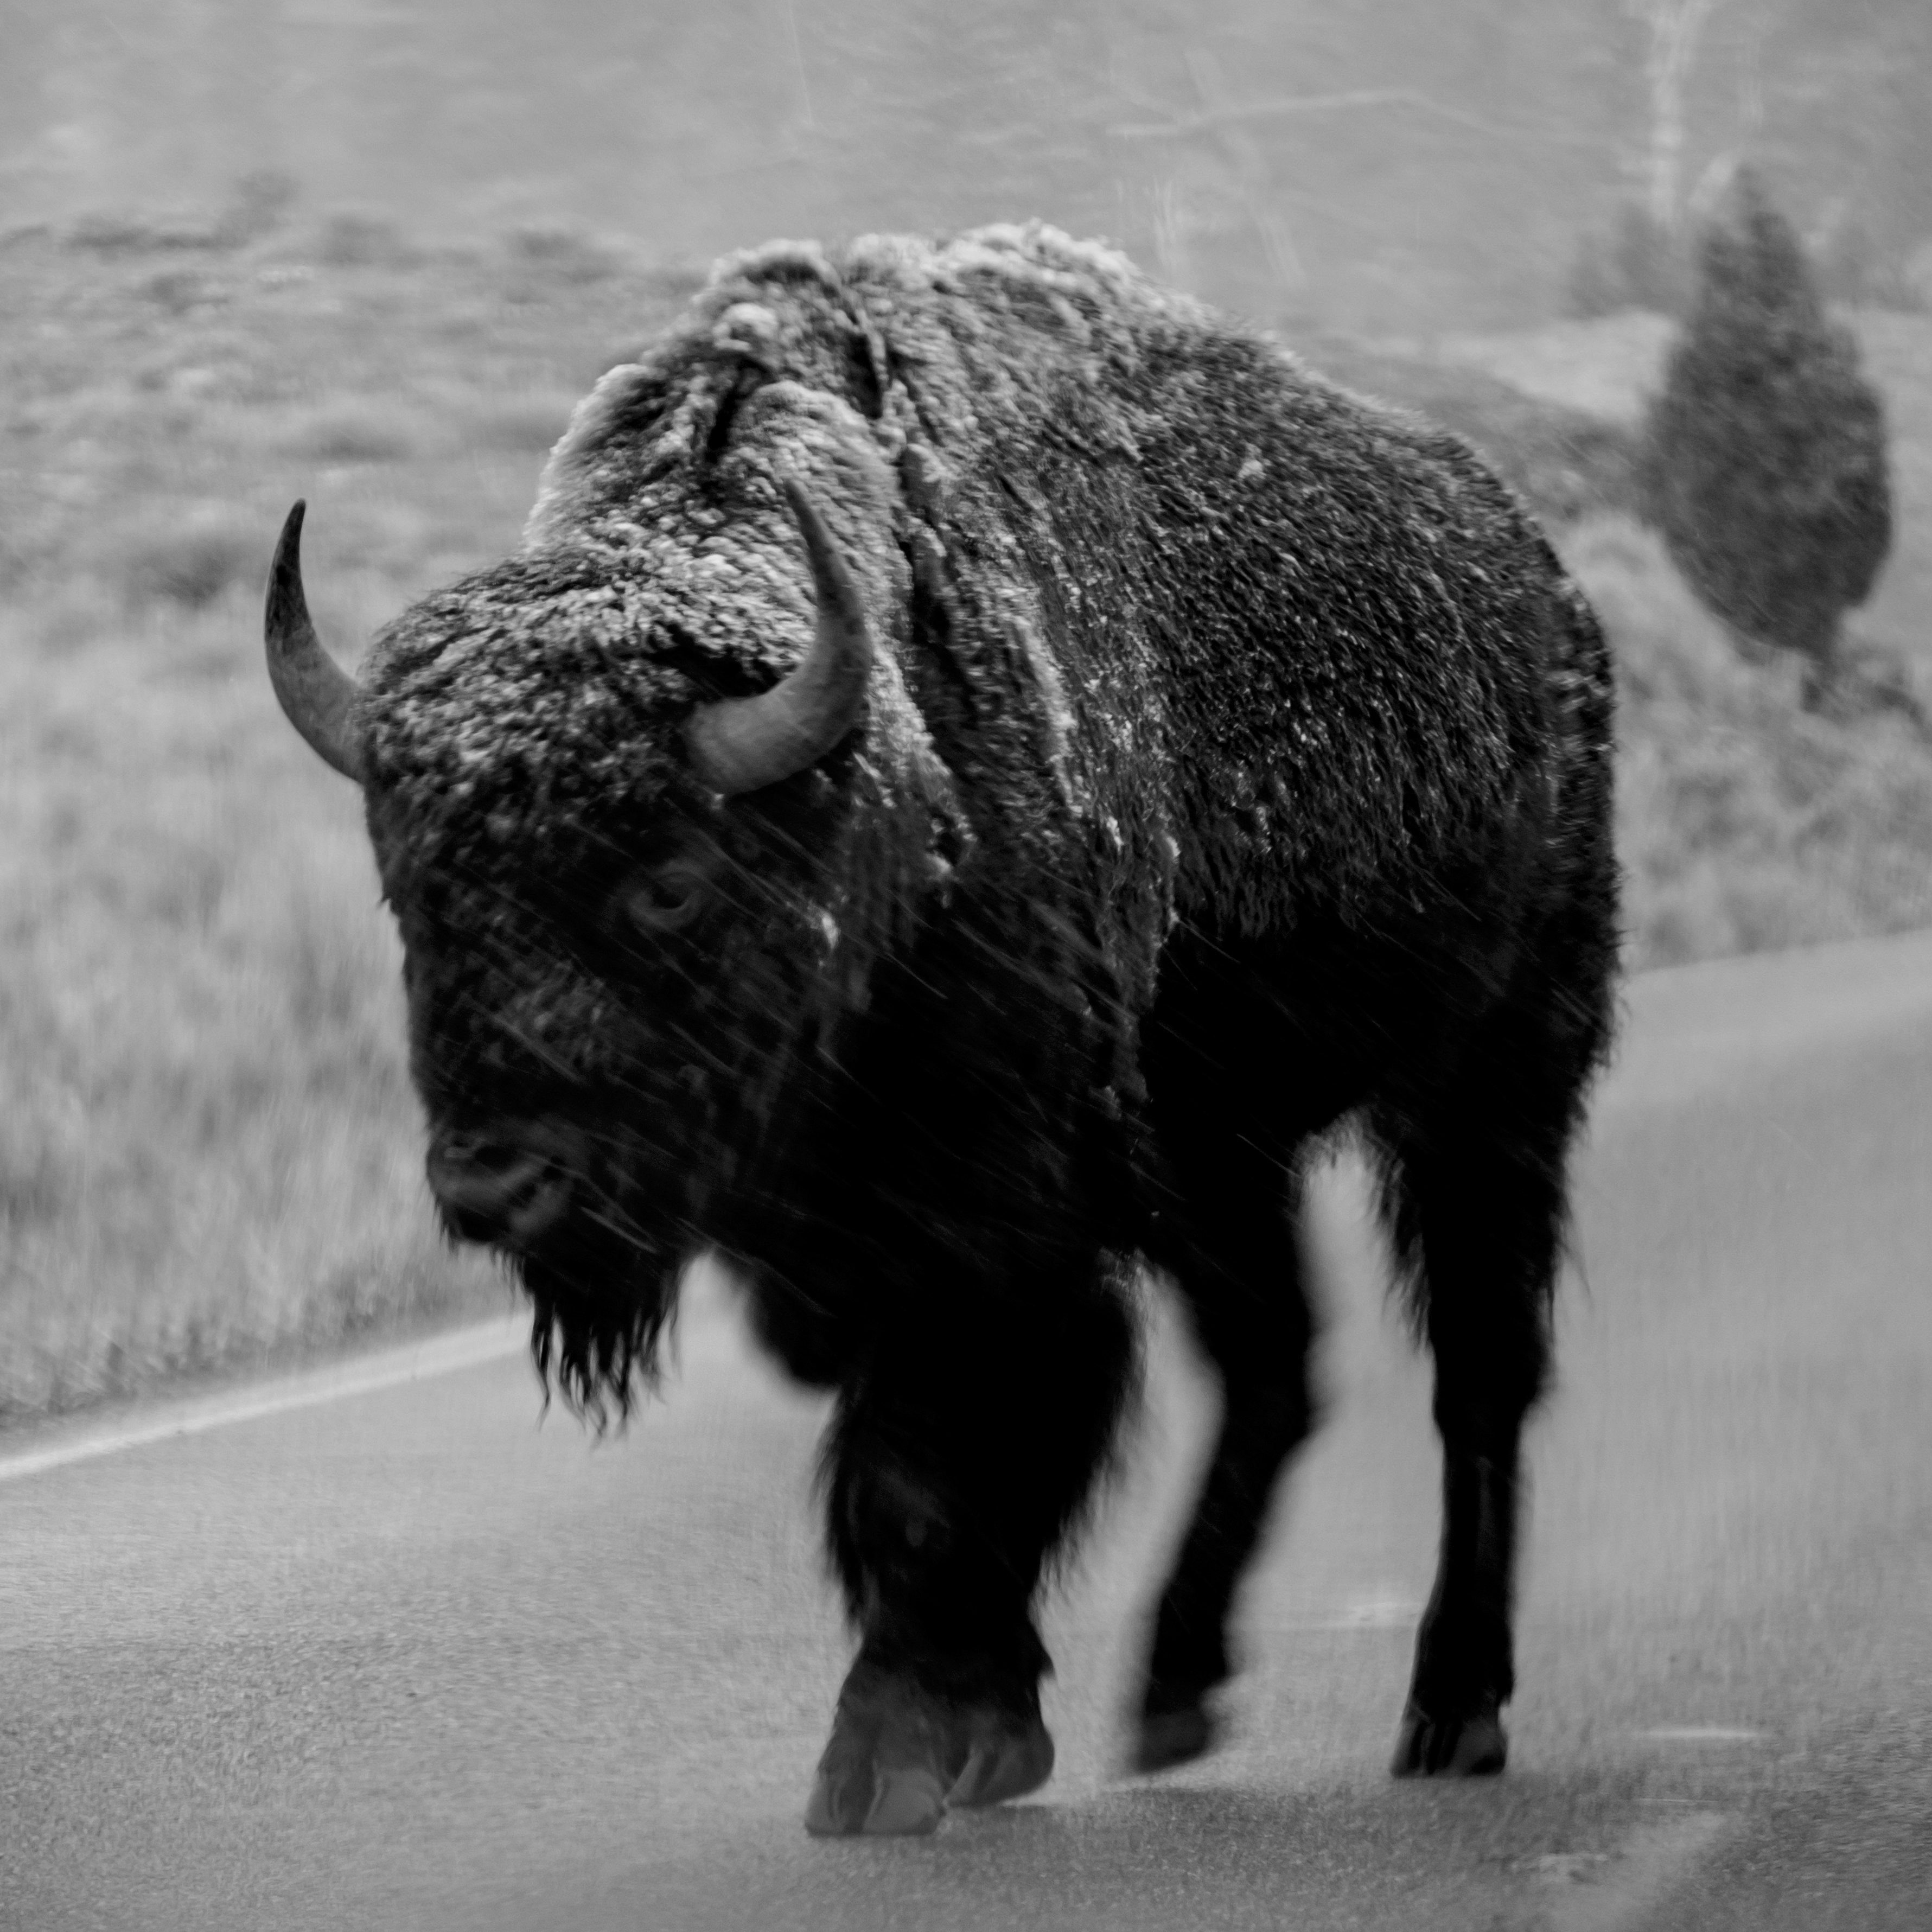 grayscale photo of bison on road